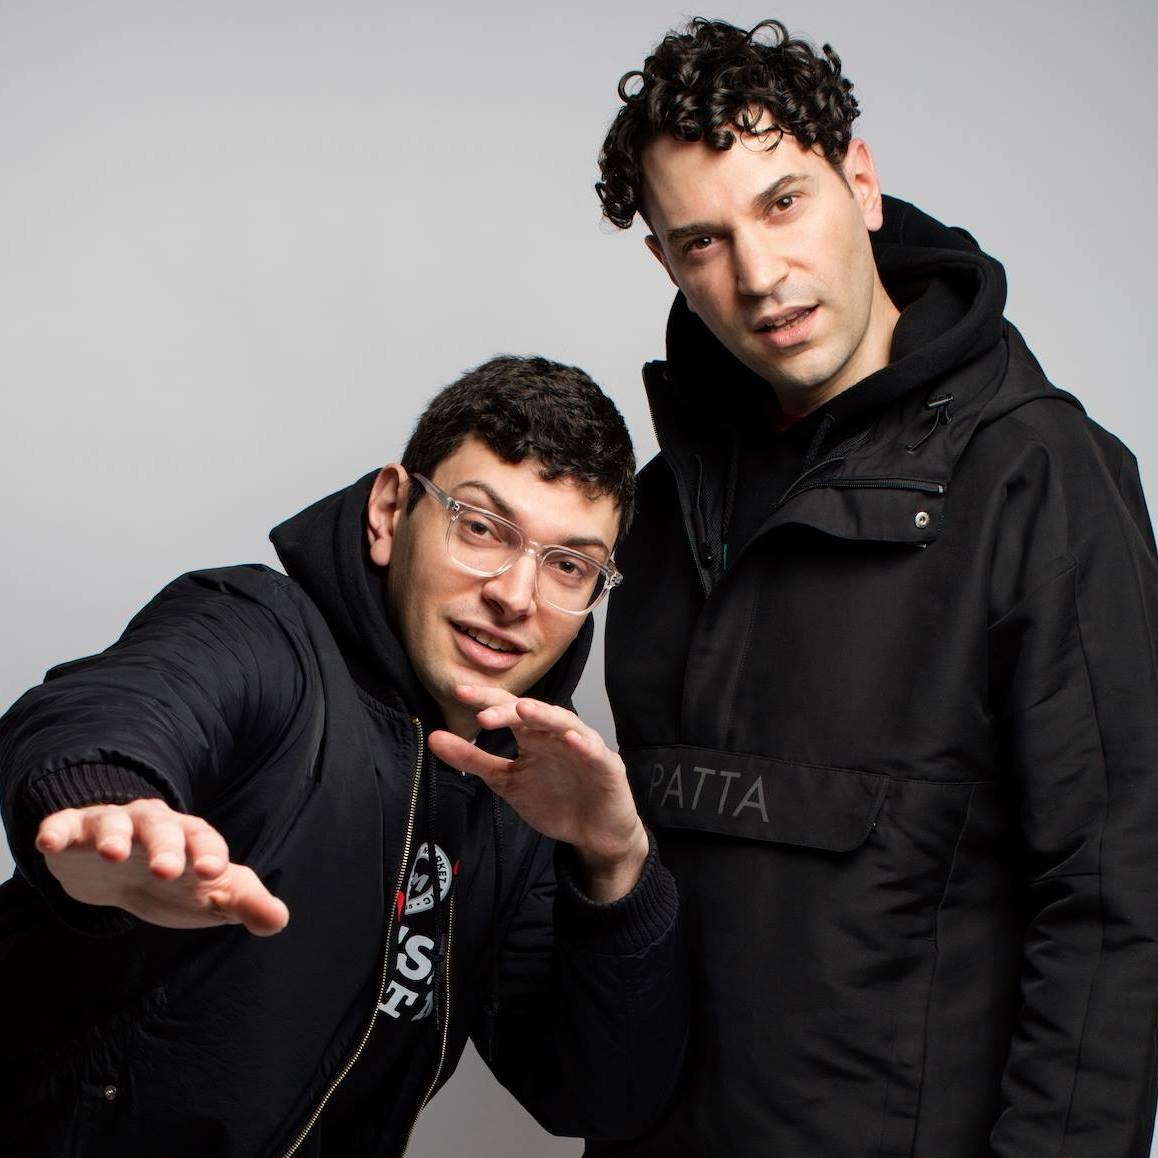 Itsthereal